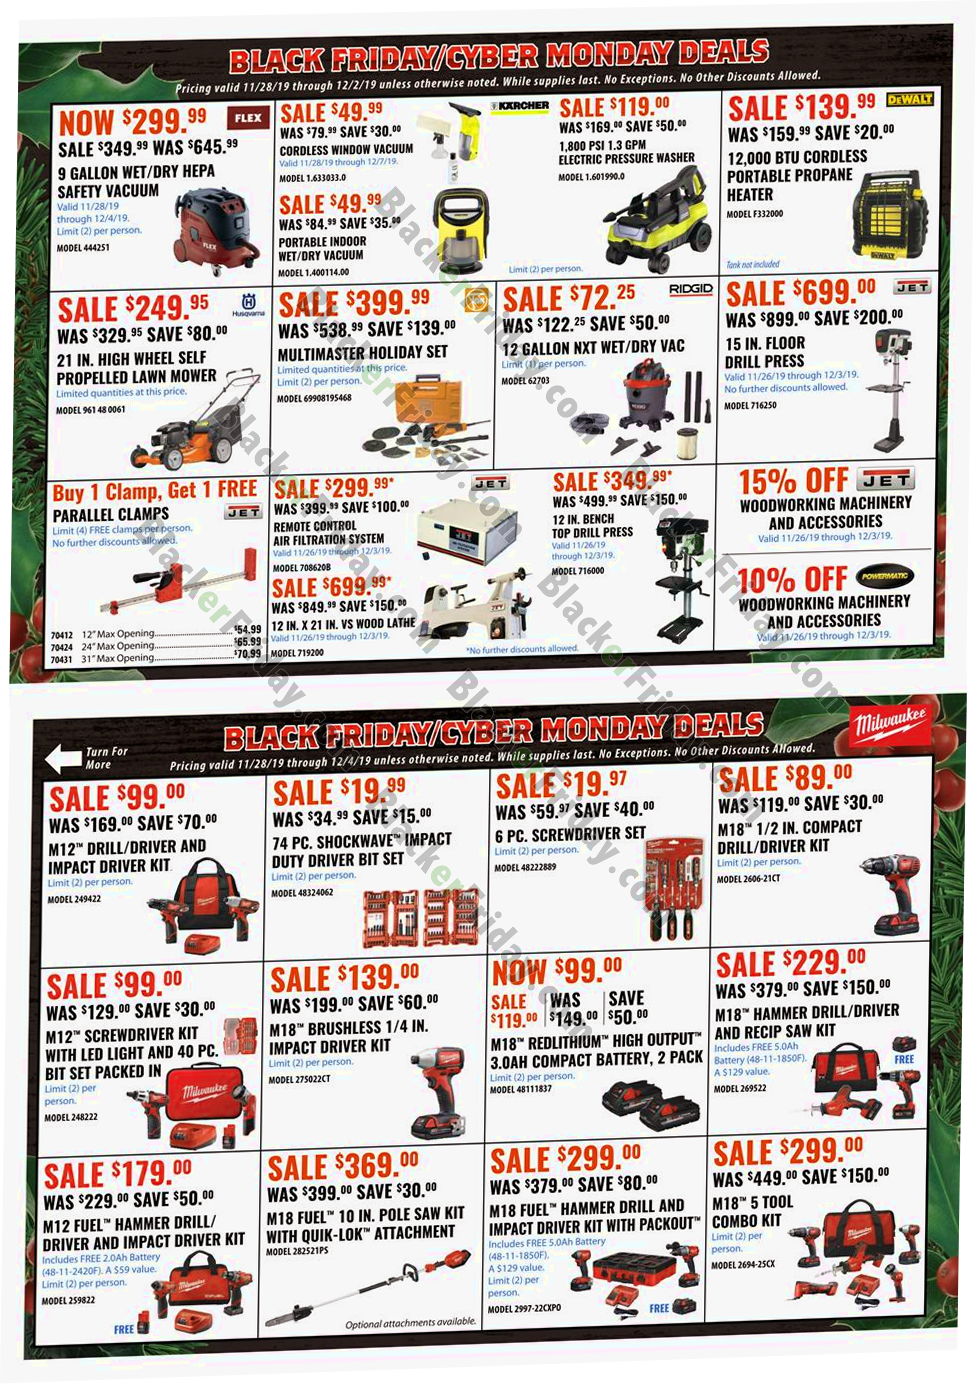 Acme Tools Black Friday 2020 Ad & Sale - What to Expect - Blacker Friday